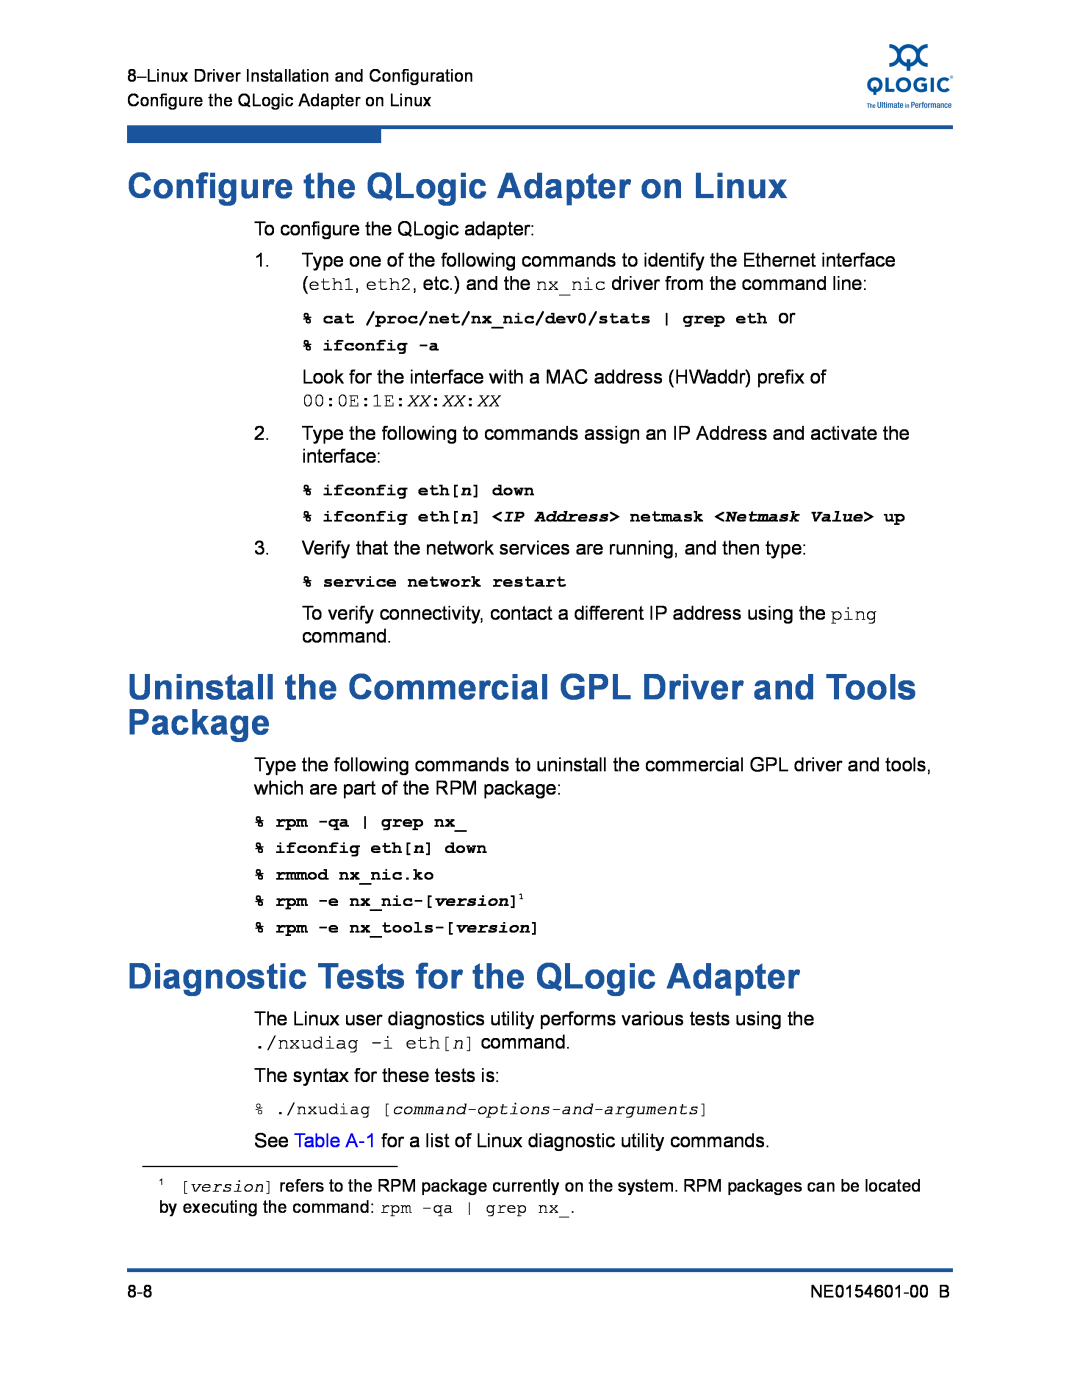 Q-Logic 3100, 3000 manual Configure the QLogic Adapter on Linux, Uninstall the Commercial GPL Driver and Tools Package 